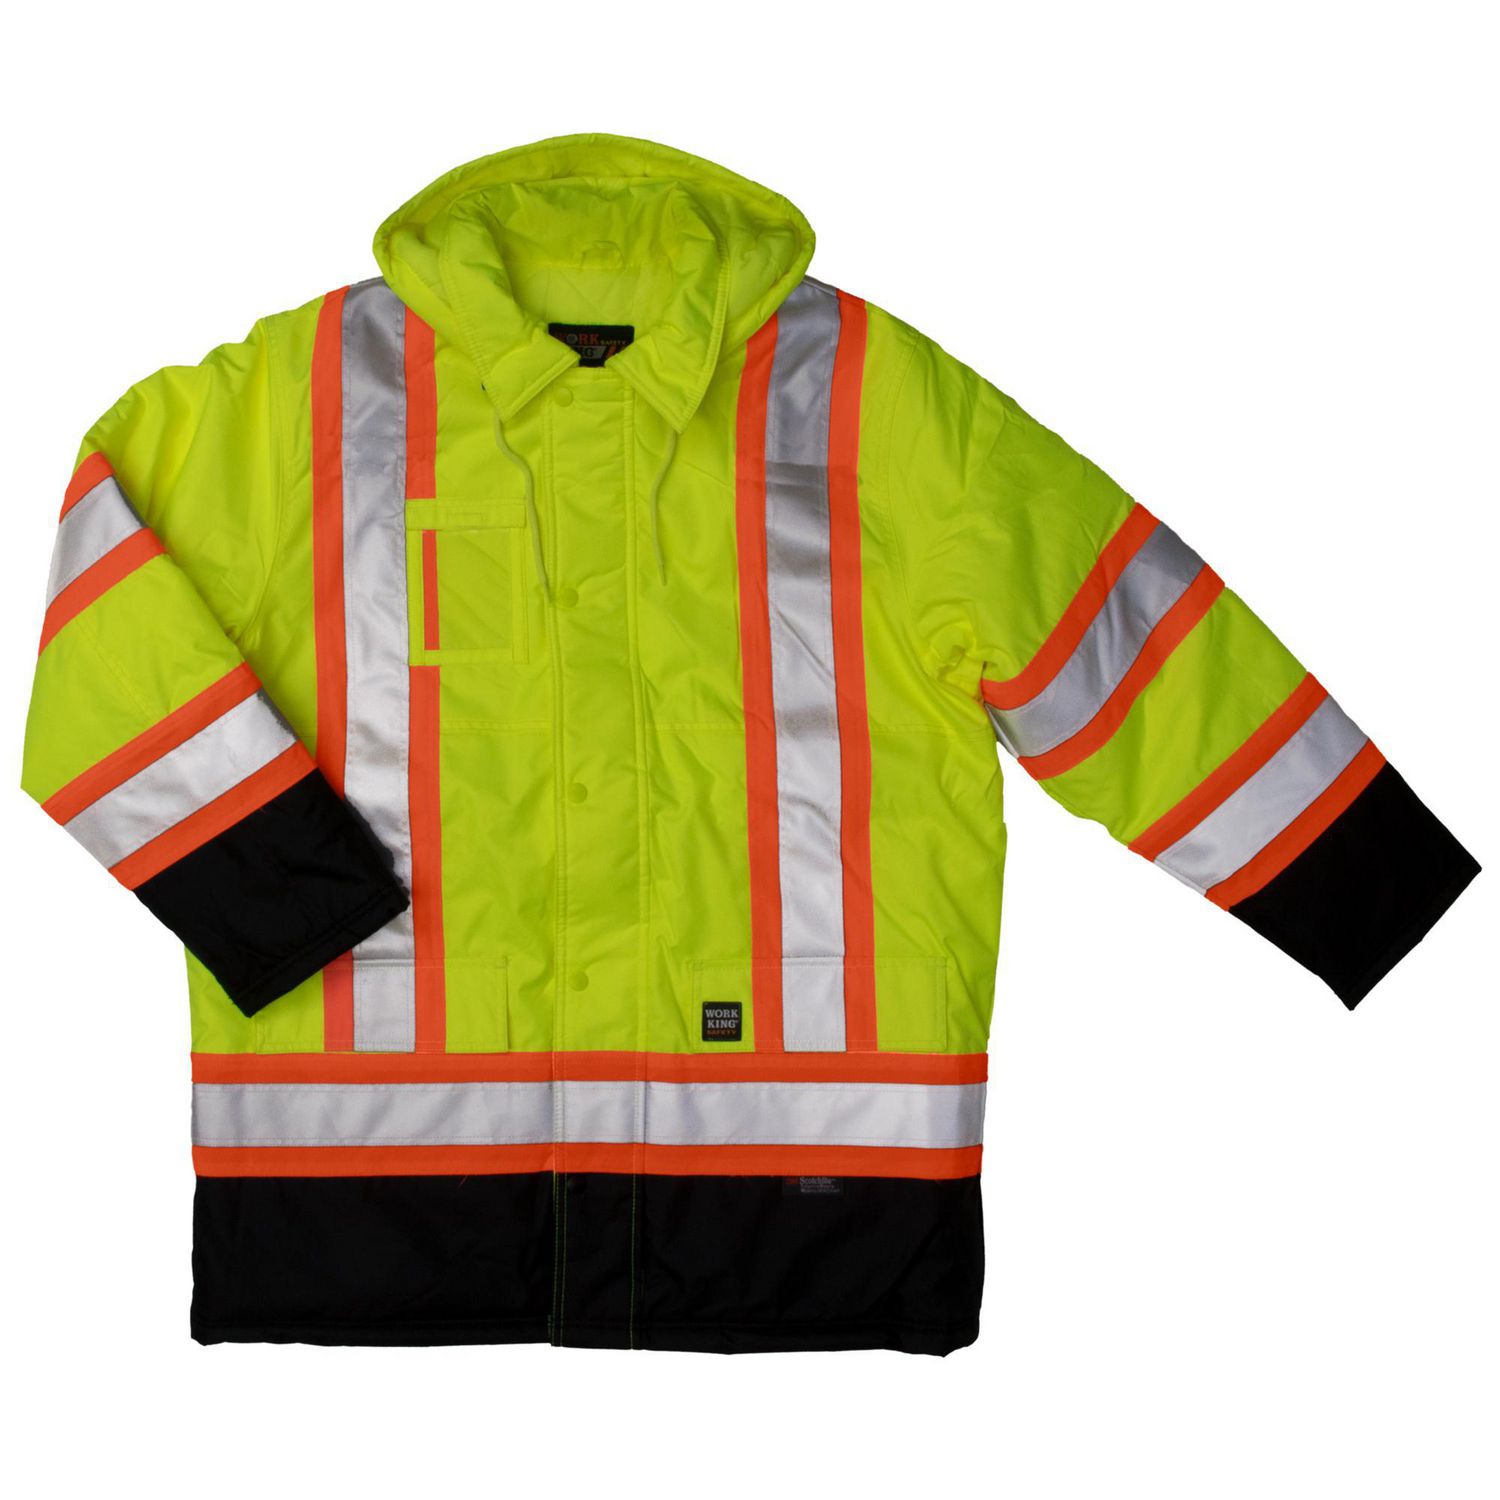 Love My Fashions® Mens Hi vis Water Proof Heavy Duty Reflective Parka Jacket Yellow and Orange Warm Work Water Resistant Work Coats Workwear 